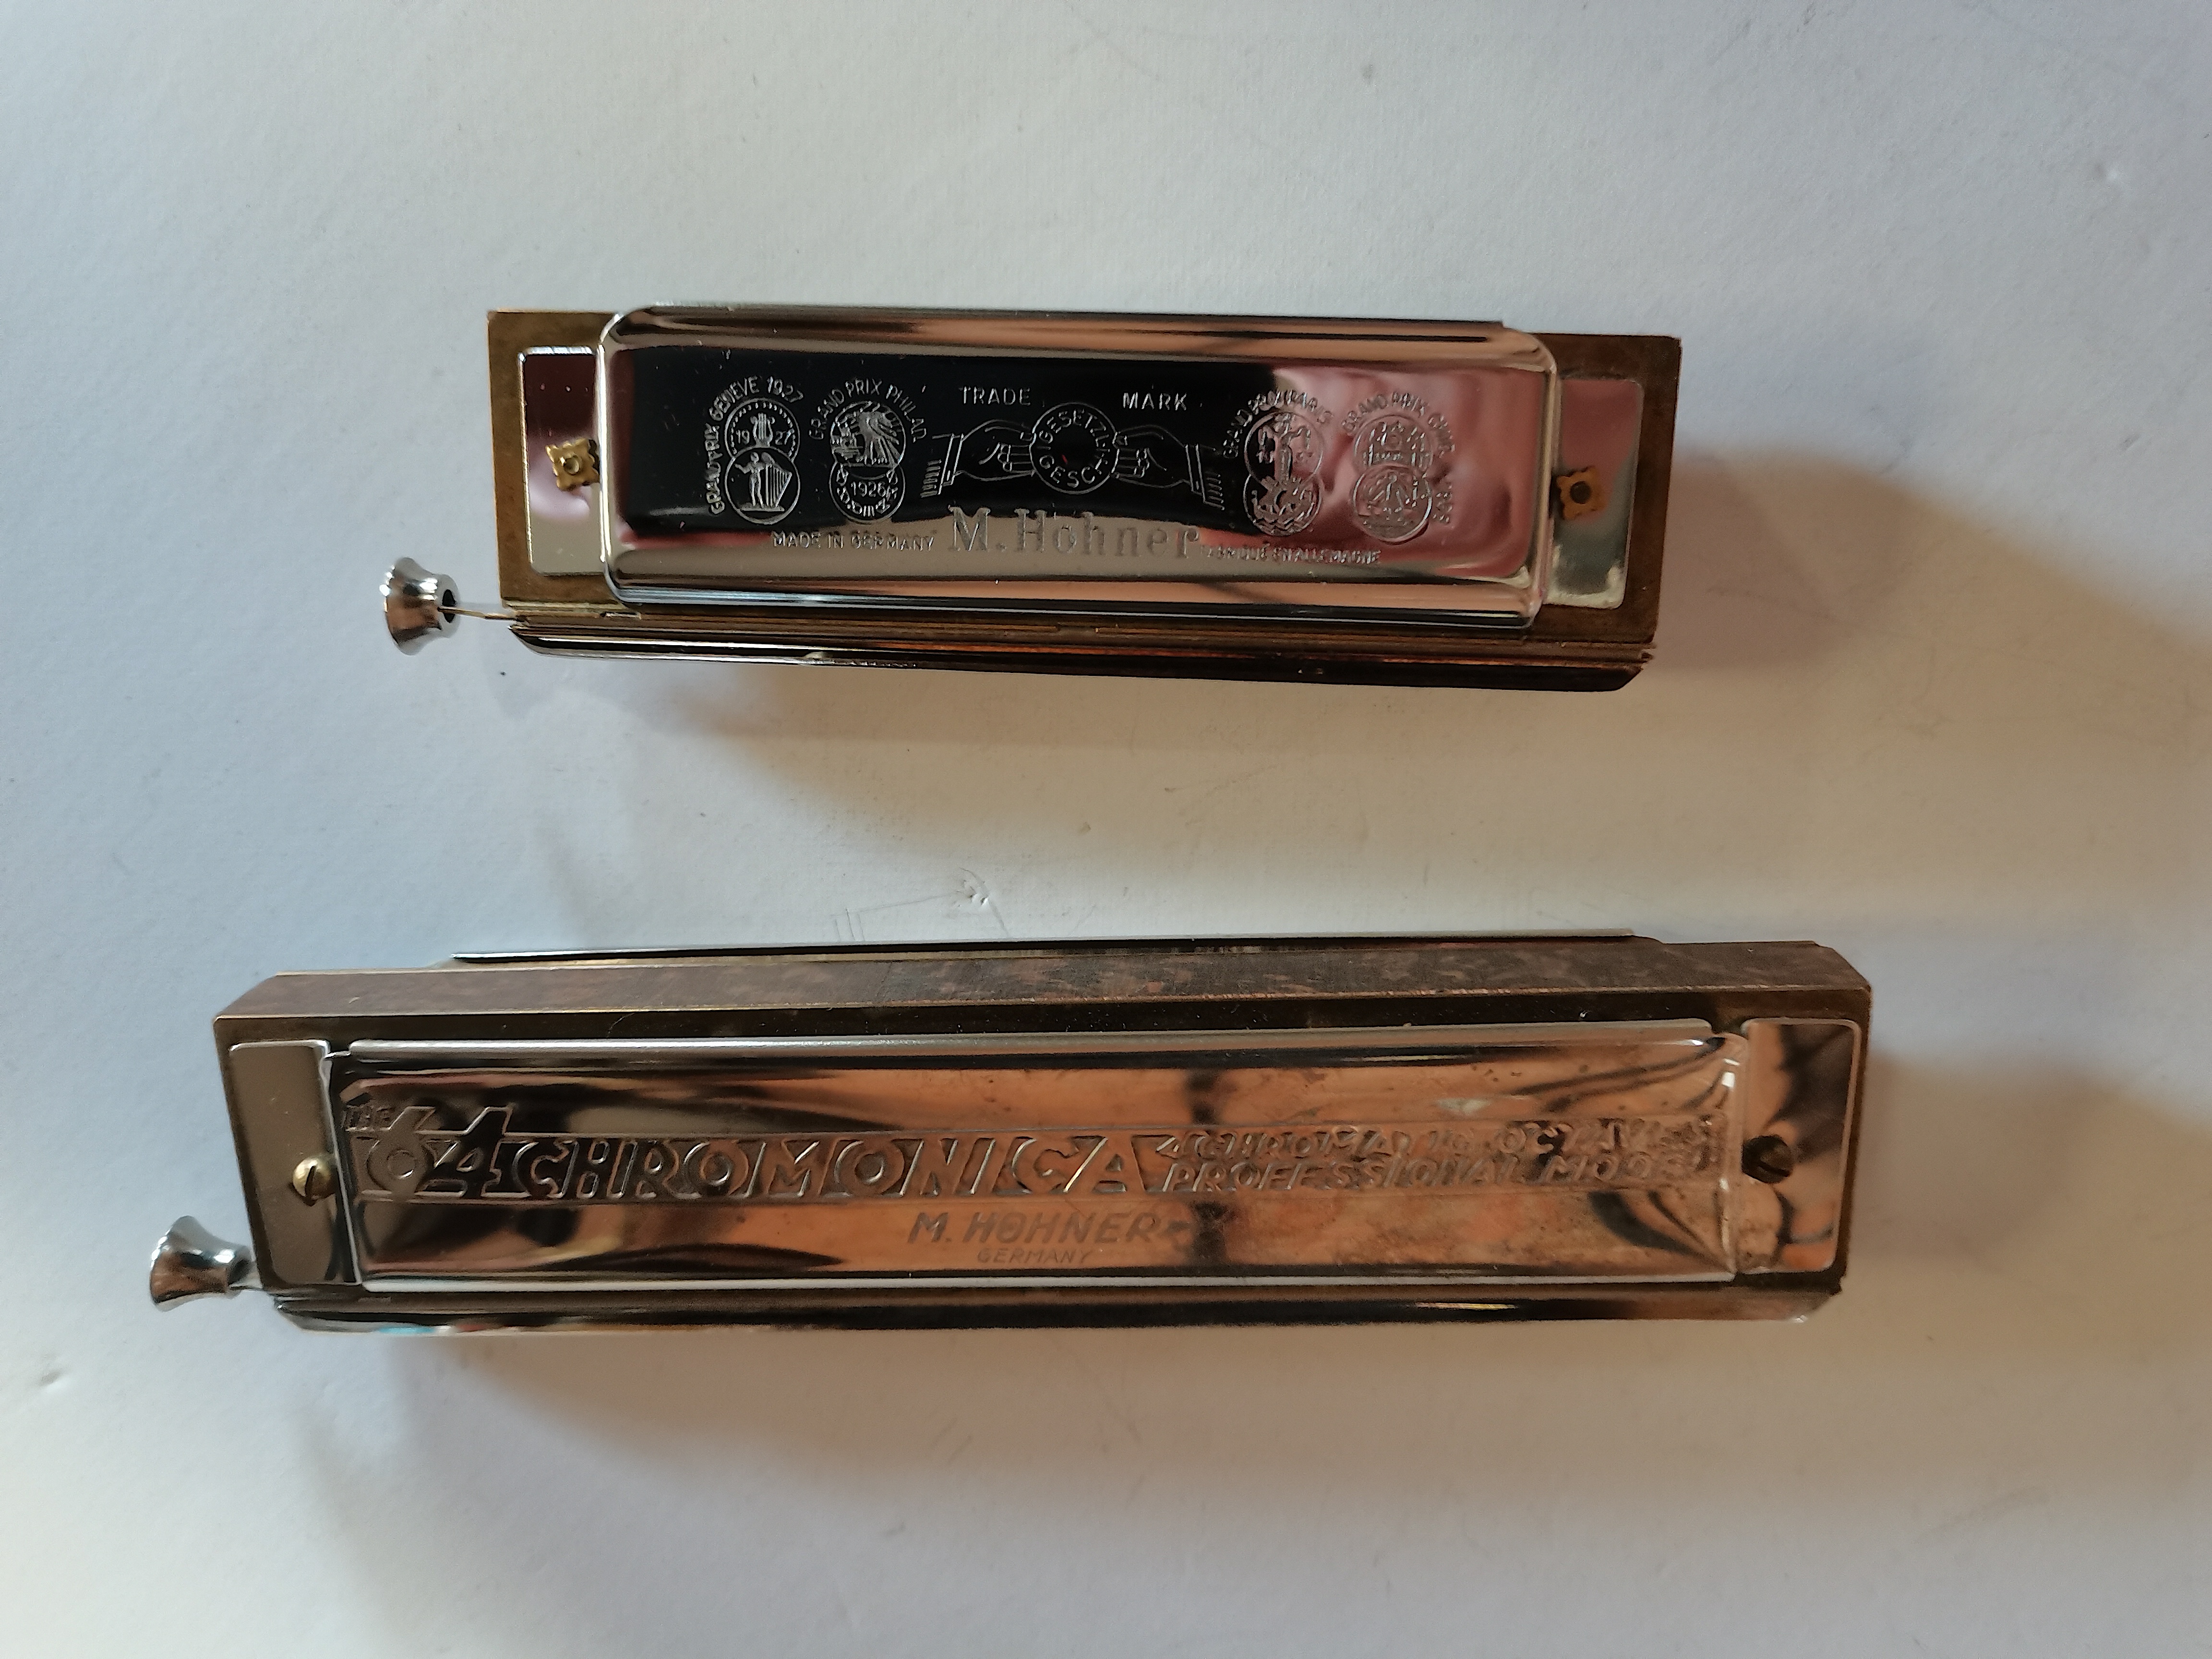 2 x Germany Harmonicas by M Horner in cases and good condition - Image 3 of 3